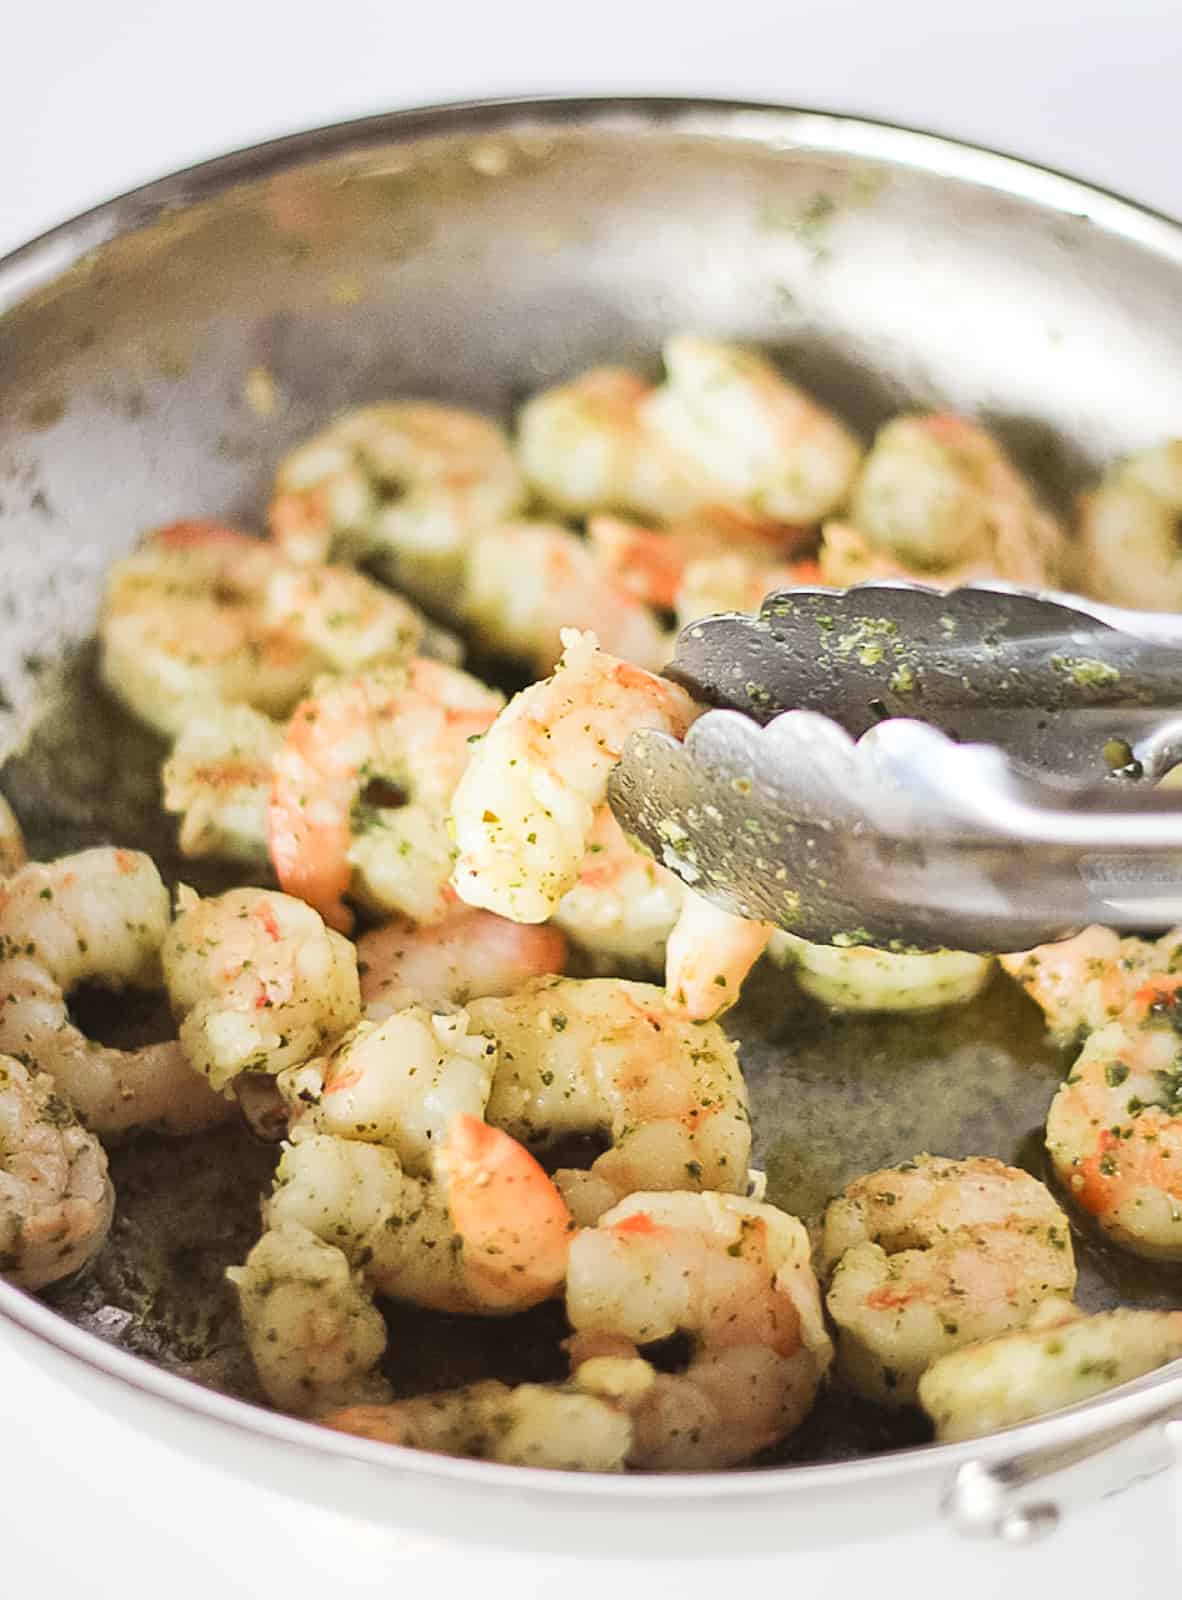 Sauted pesto shrimp in a stainless steel pan with tongs.